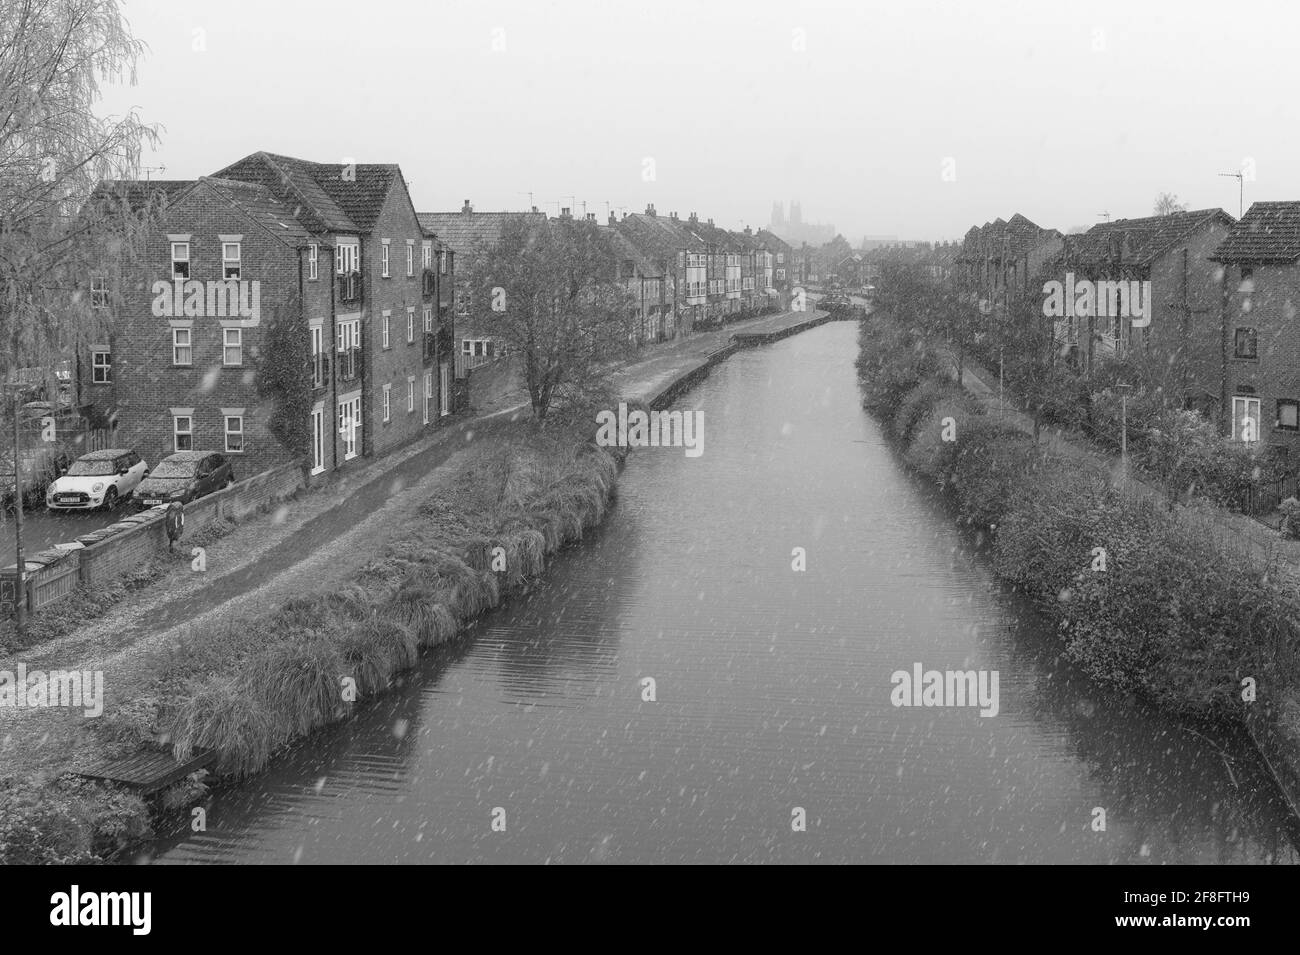 Snow falls in spring over the beck flanked by town houses on a bleak morning in Beverley, Yorkshire, UK. Stock Photo